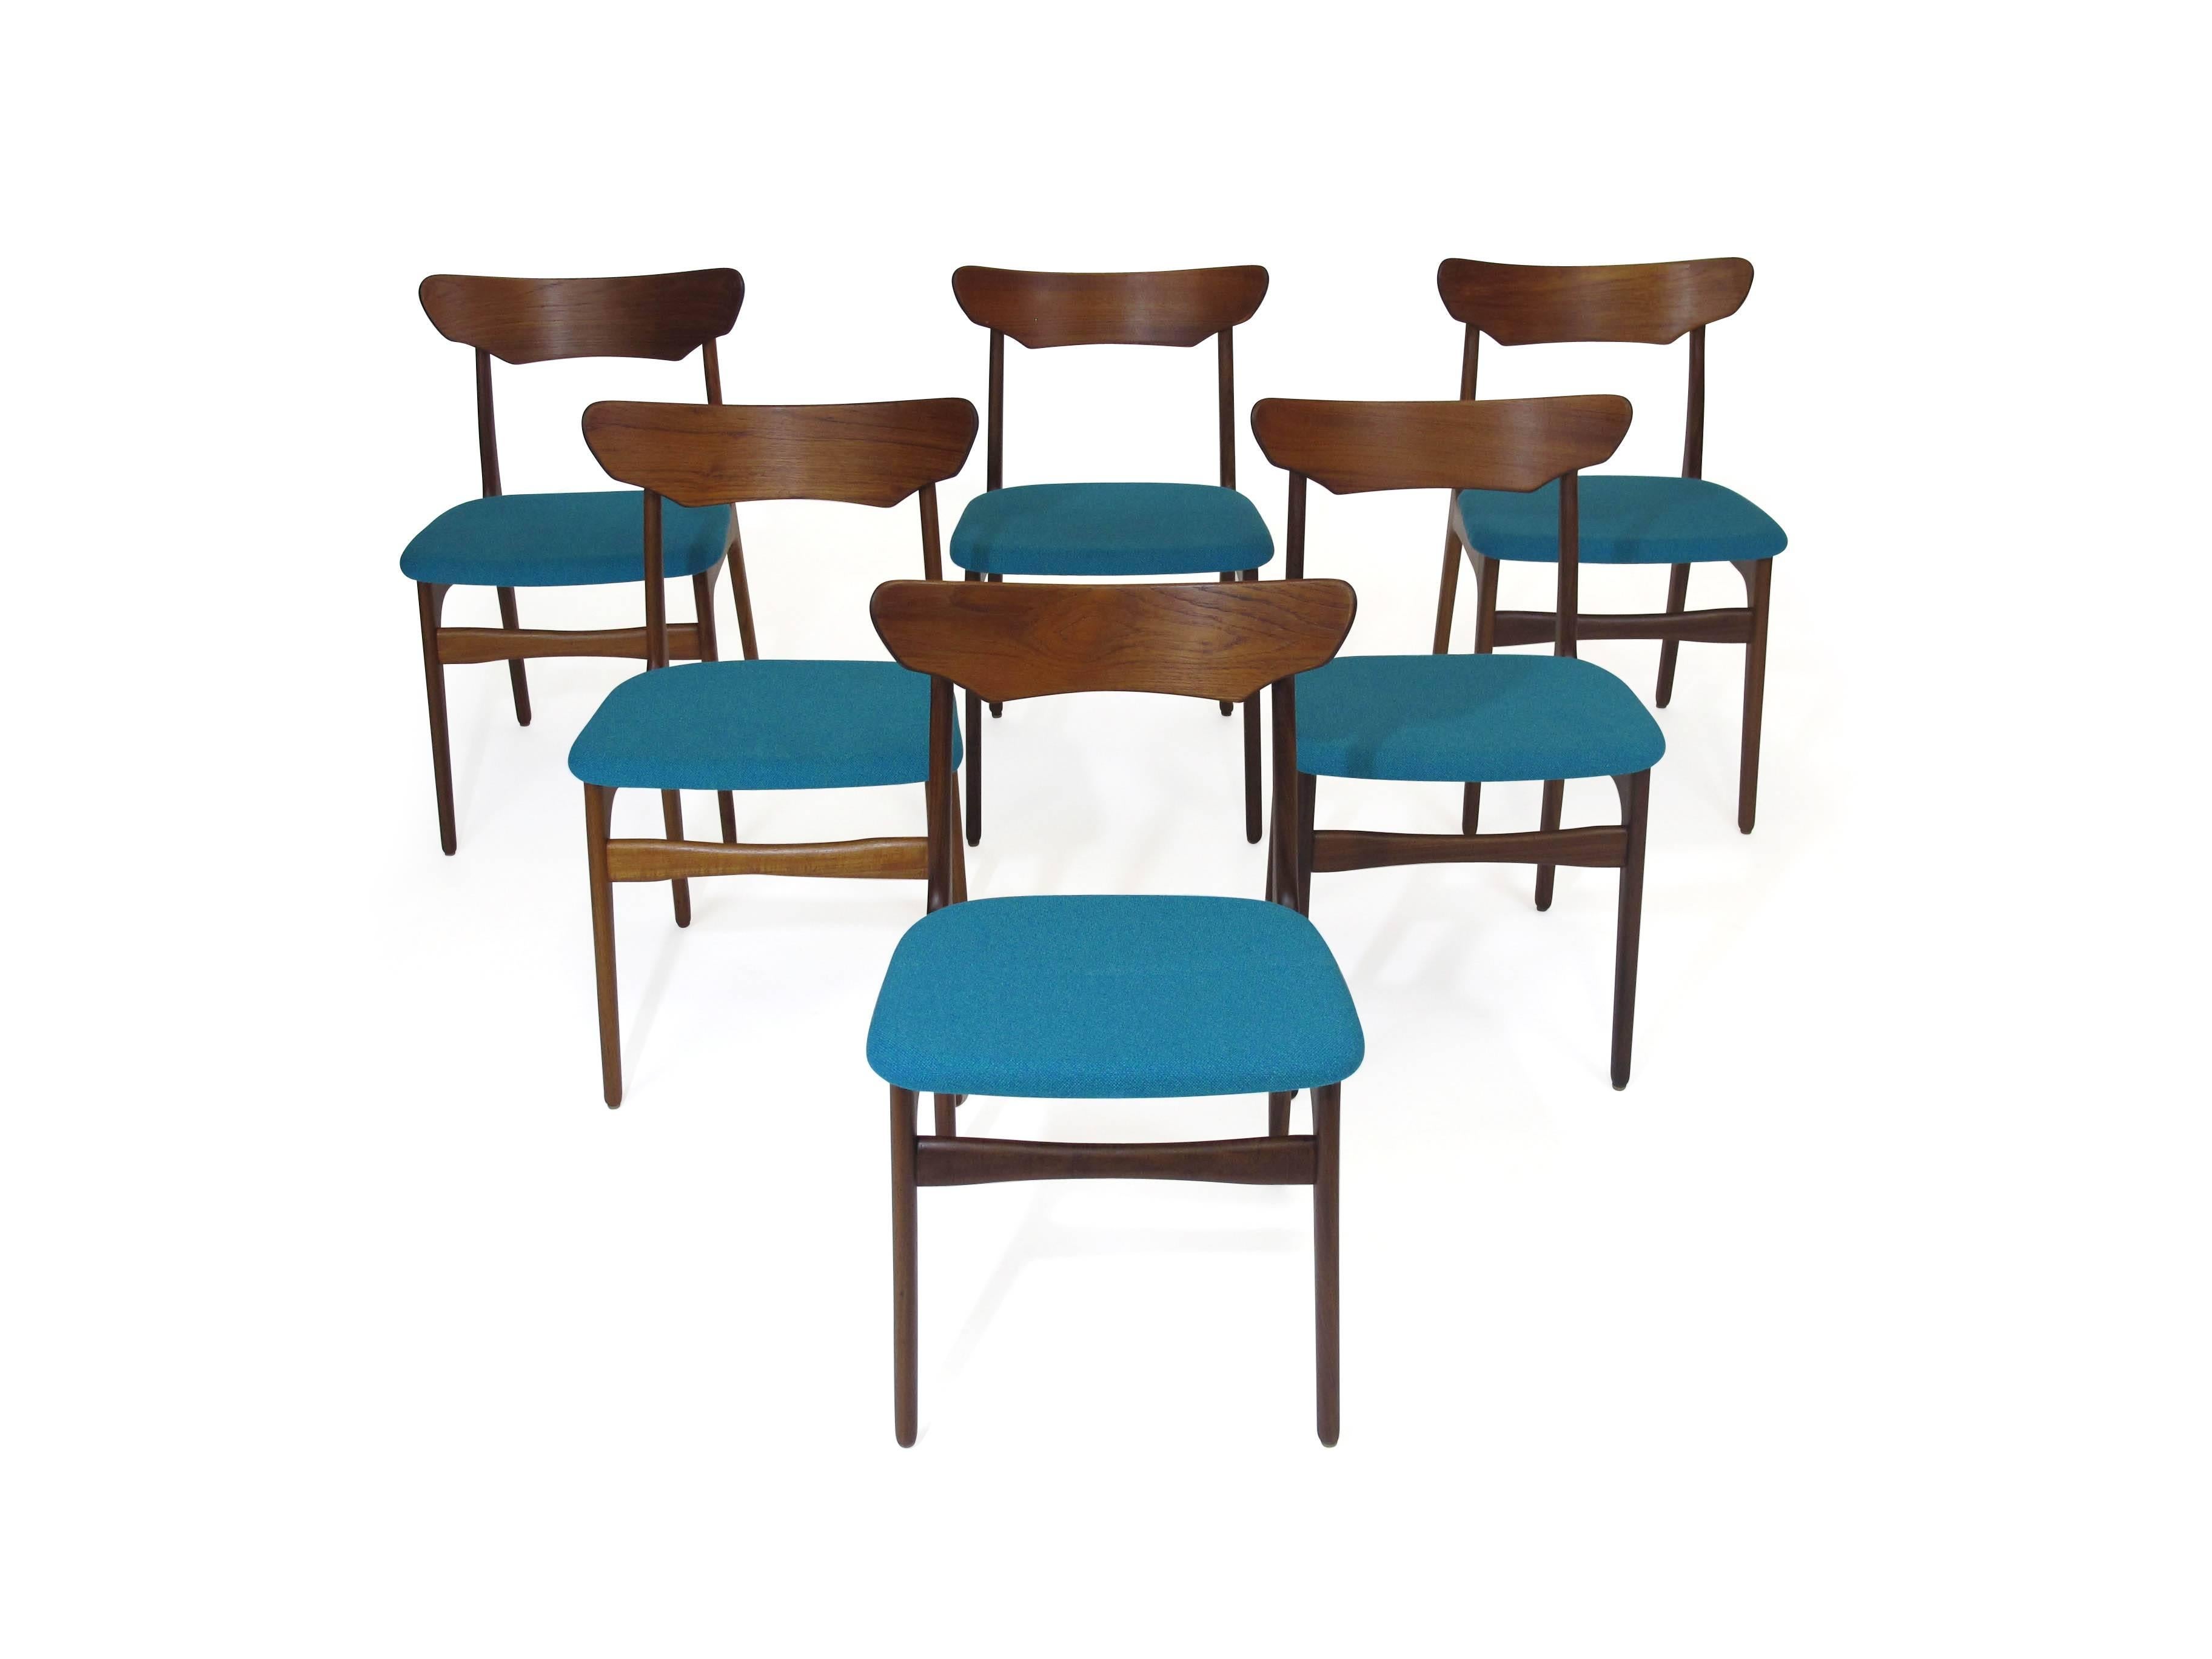 Six Mid-Century dining chairs designed by Schionning and Elgaard for Randers Mobelfabrik. Solid teak wood frames with newly upholstered seats in a teal wool fabric. Additional chairs and upholstery options available upon request.

 